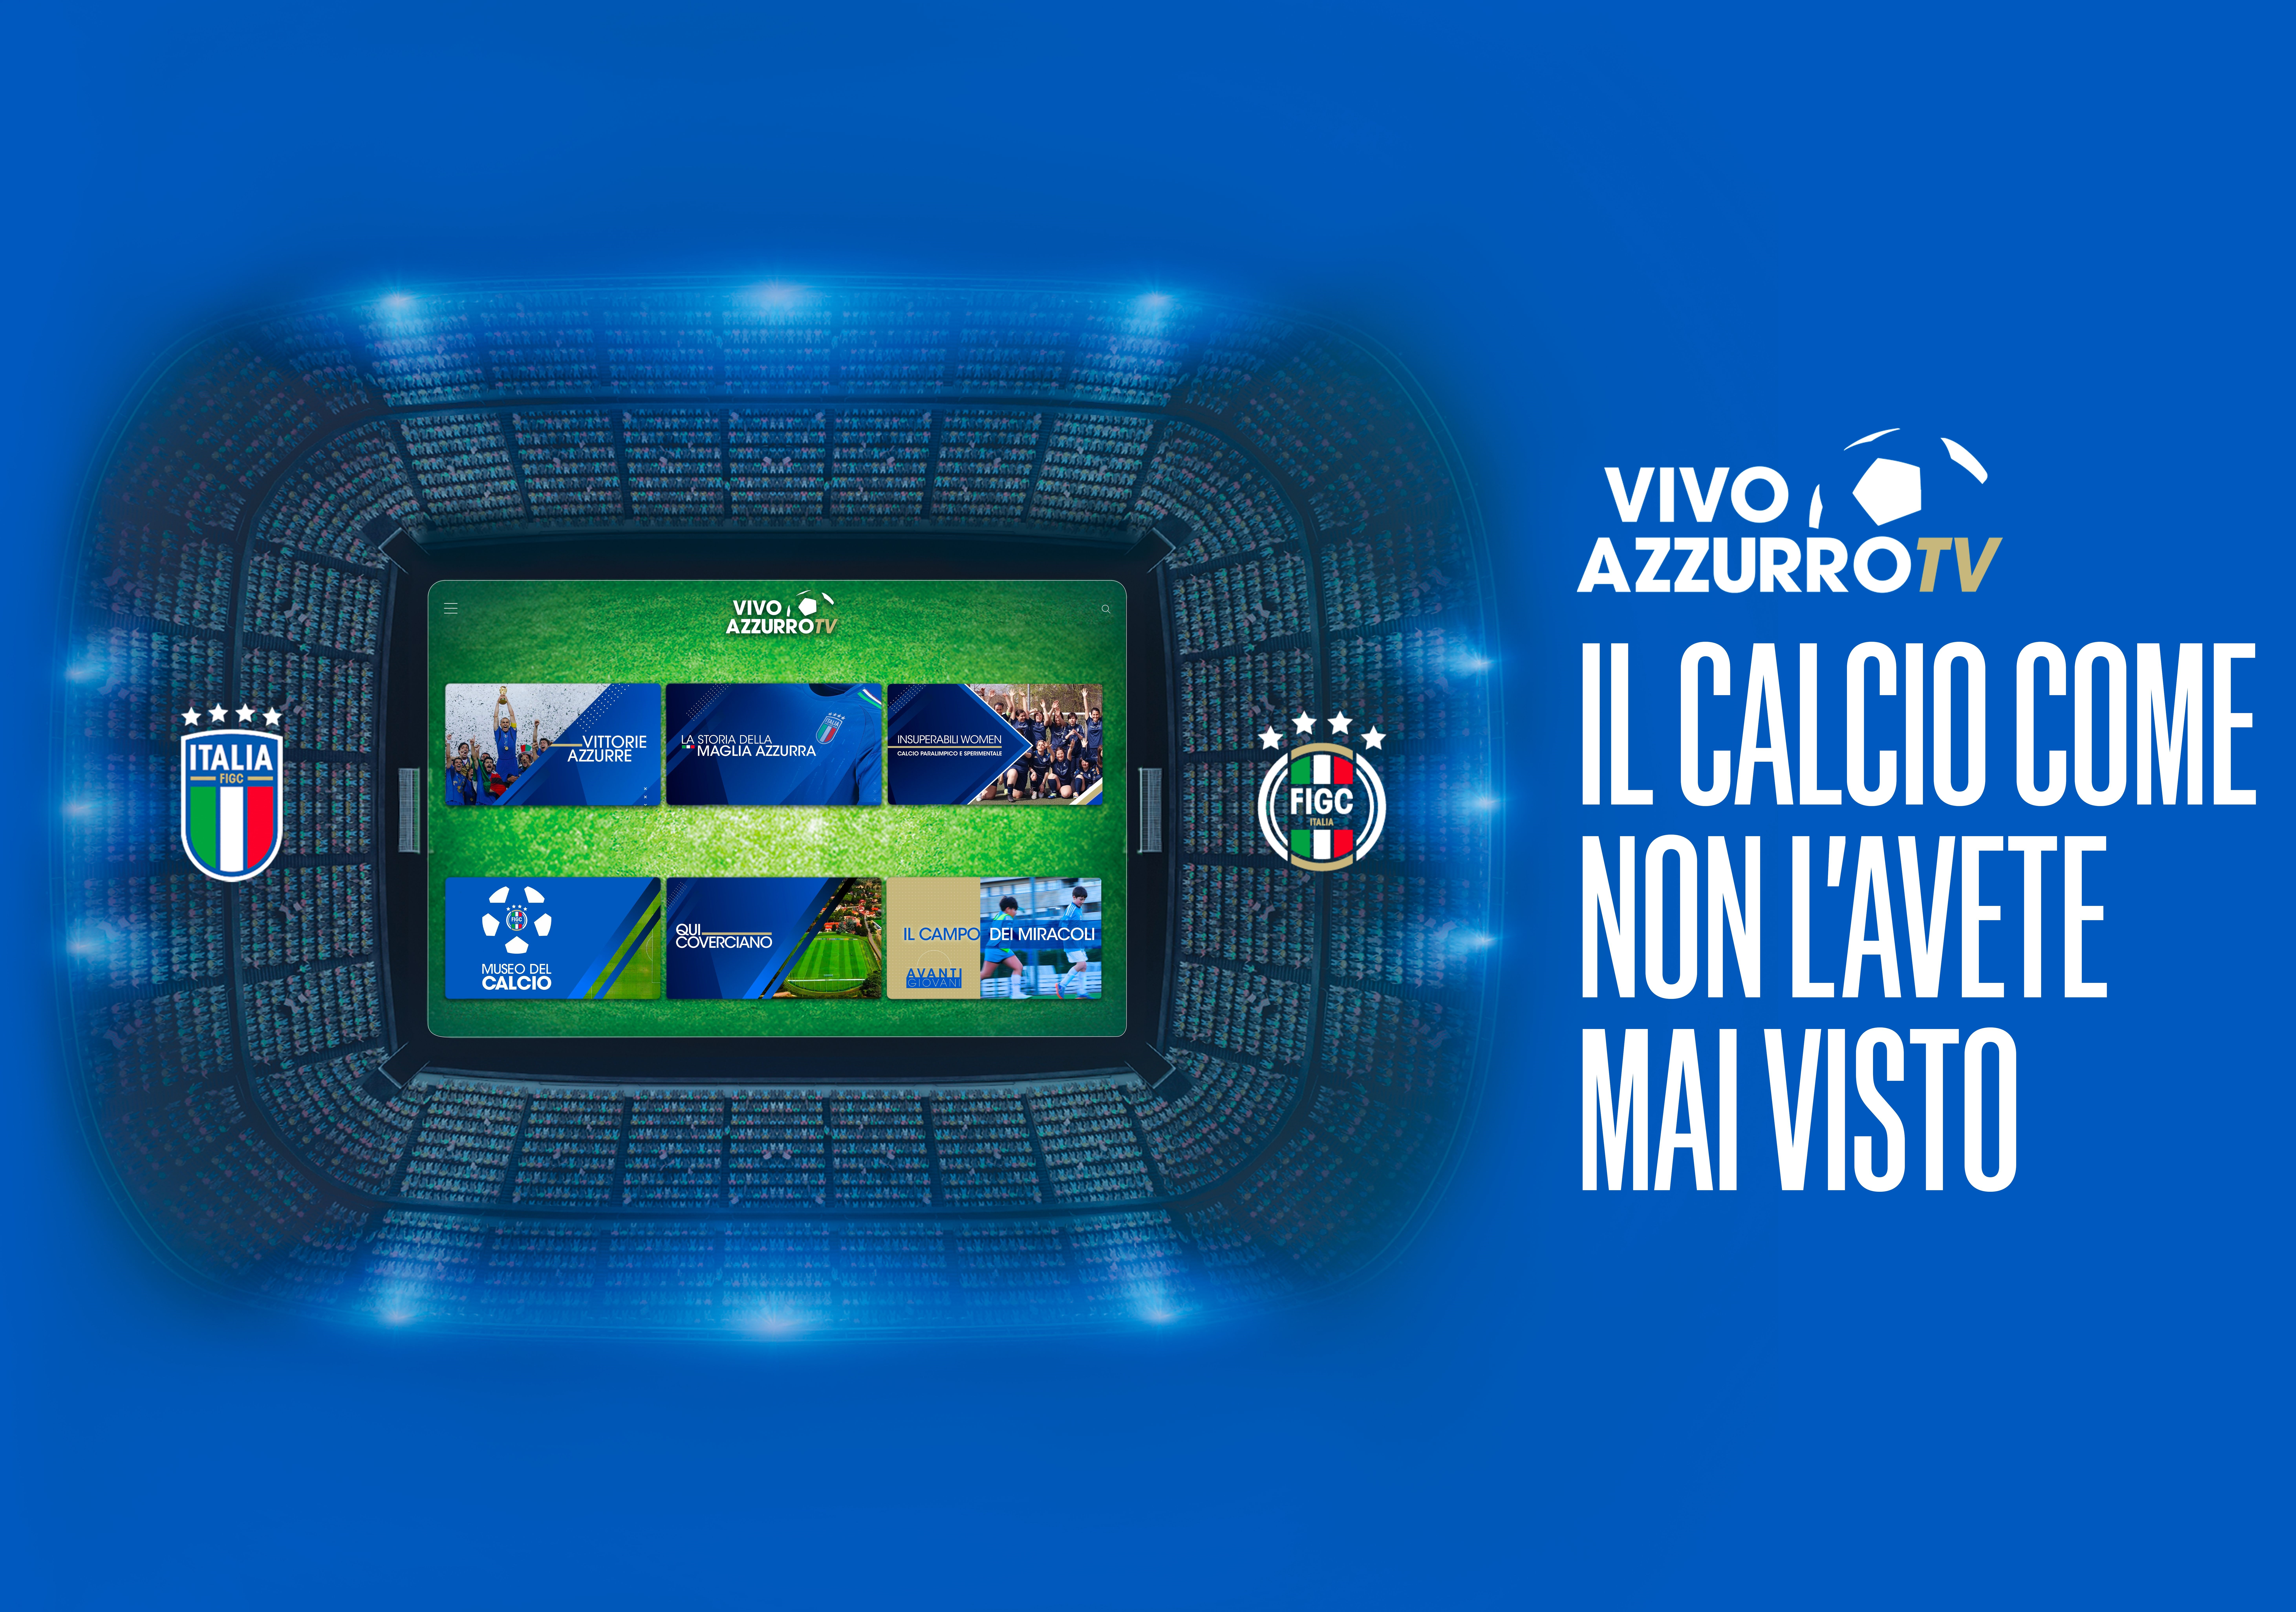 Vivo Azzurro TV to be presented on Tuesday 14 May